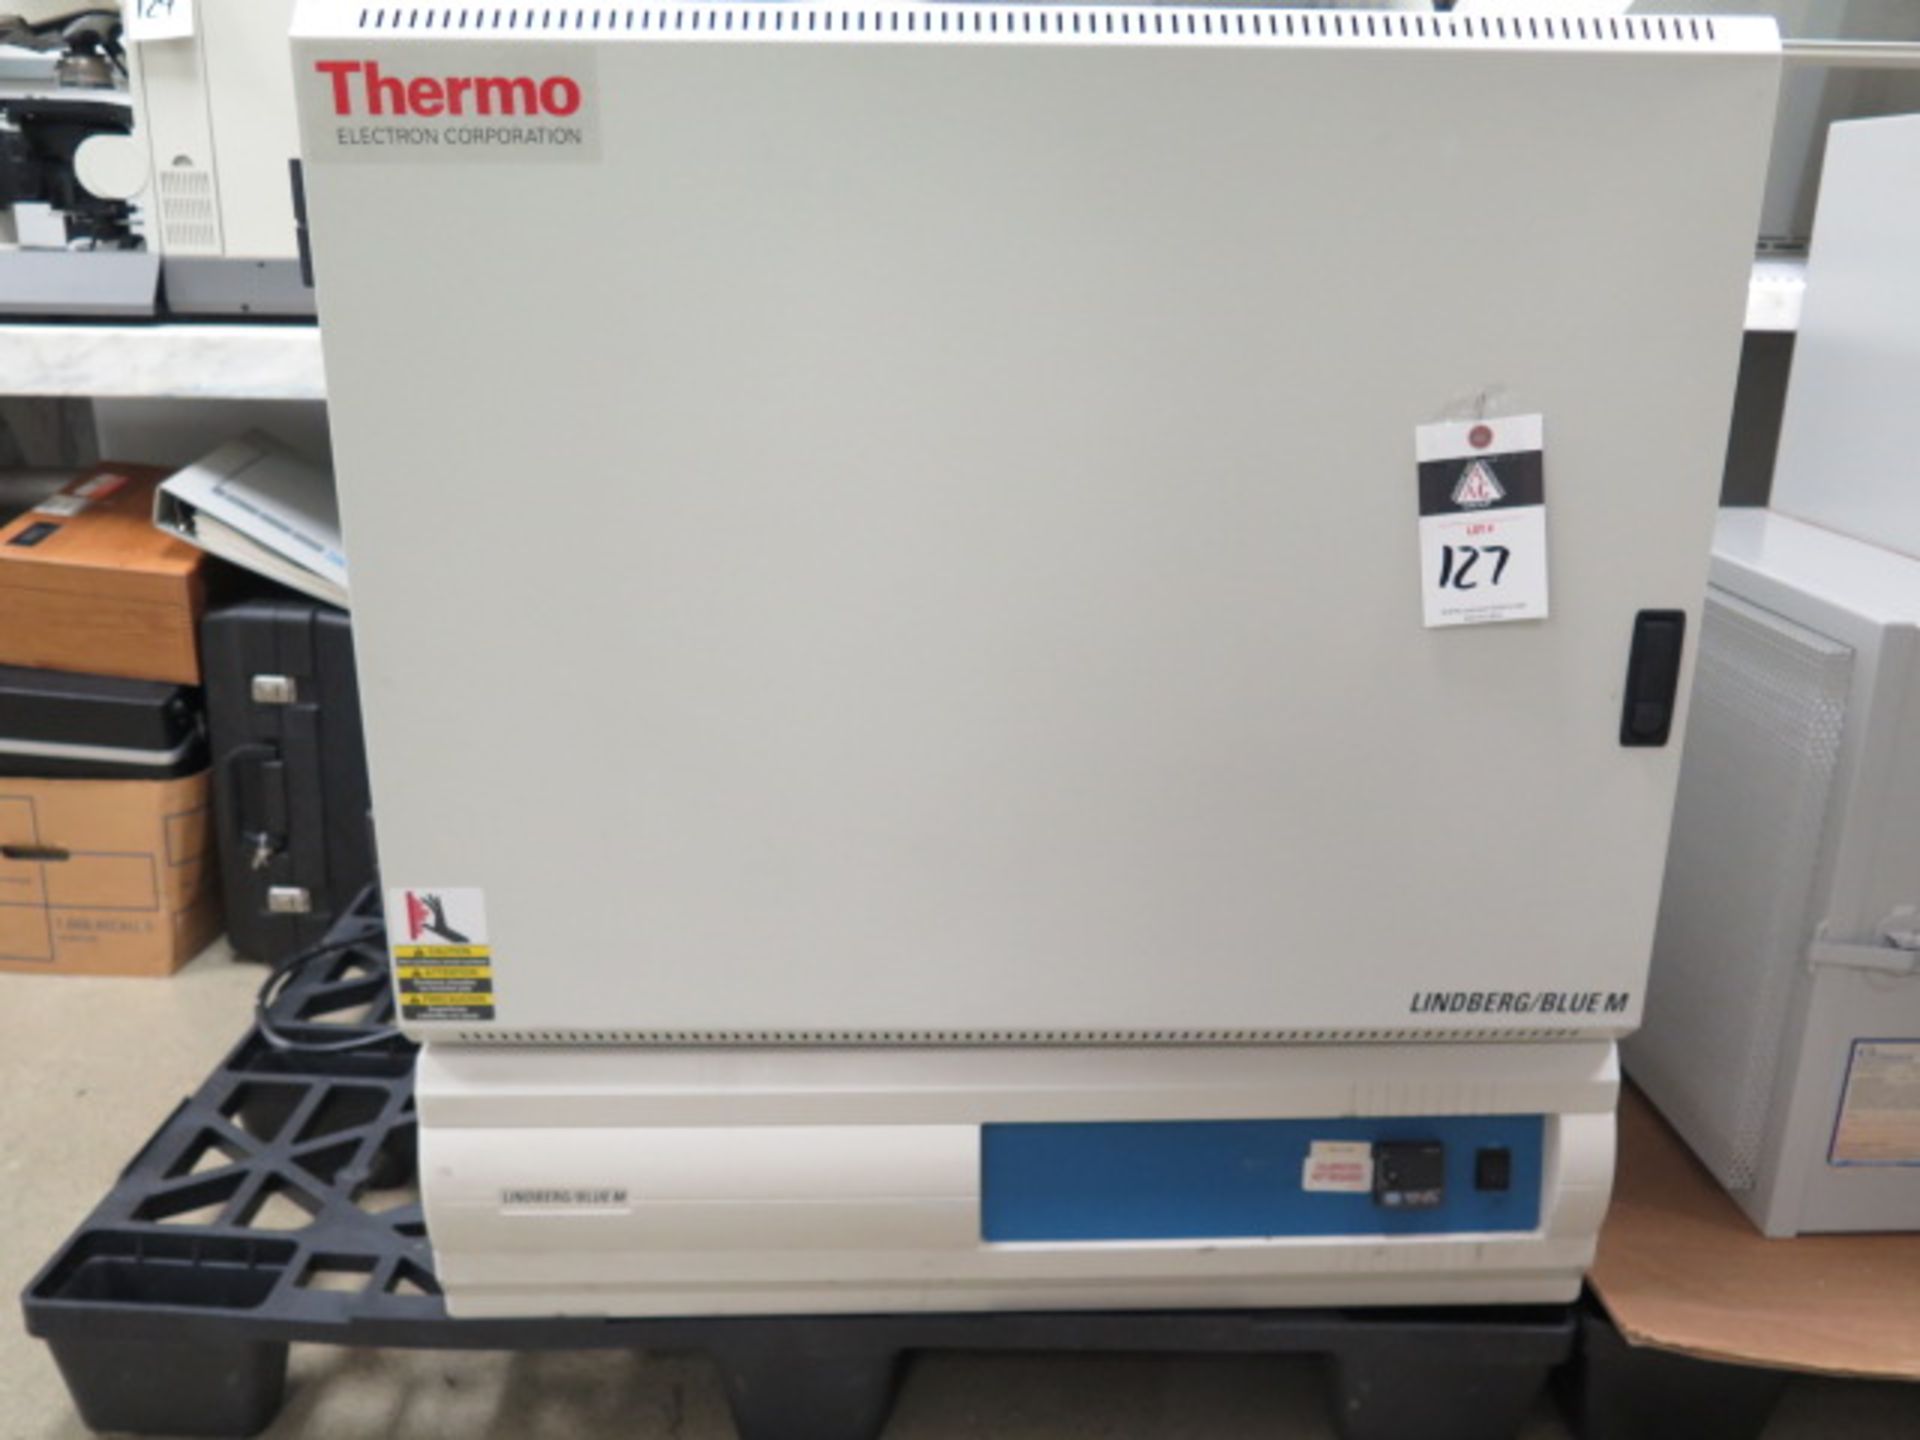 Thermo Electron Lindberg / BlueM mdl. MO1440A-1 Oven s/n Z15R-509008-ZR 300 Degrees C, SOLD AS IS